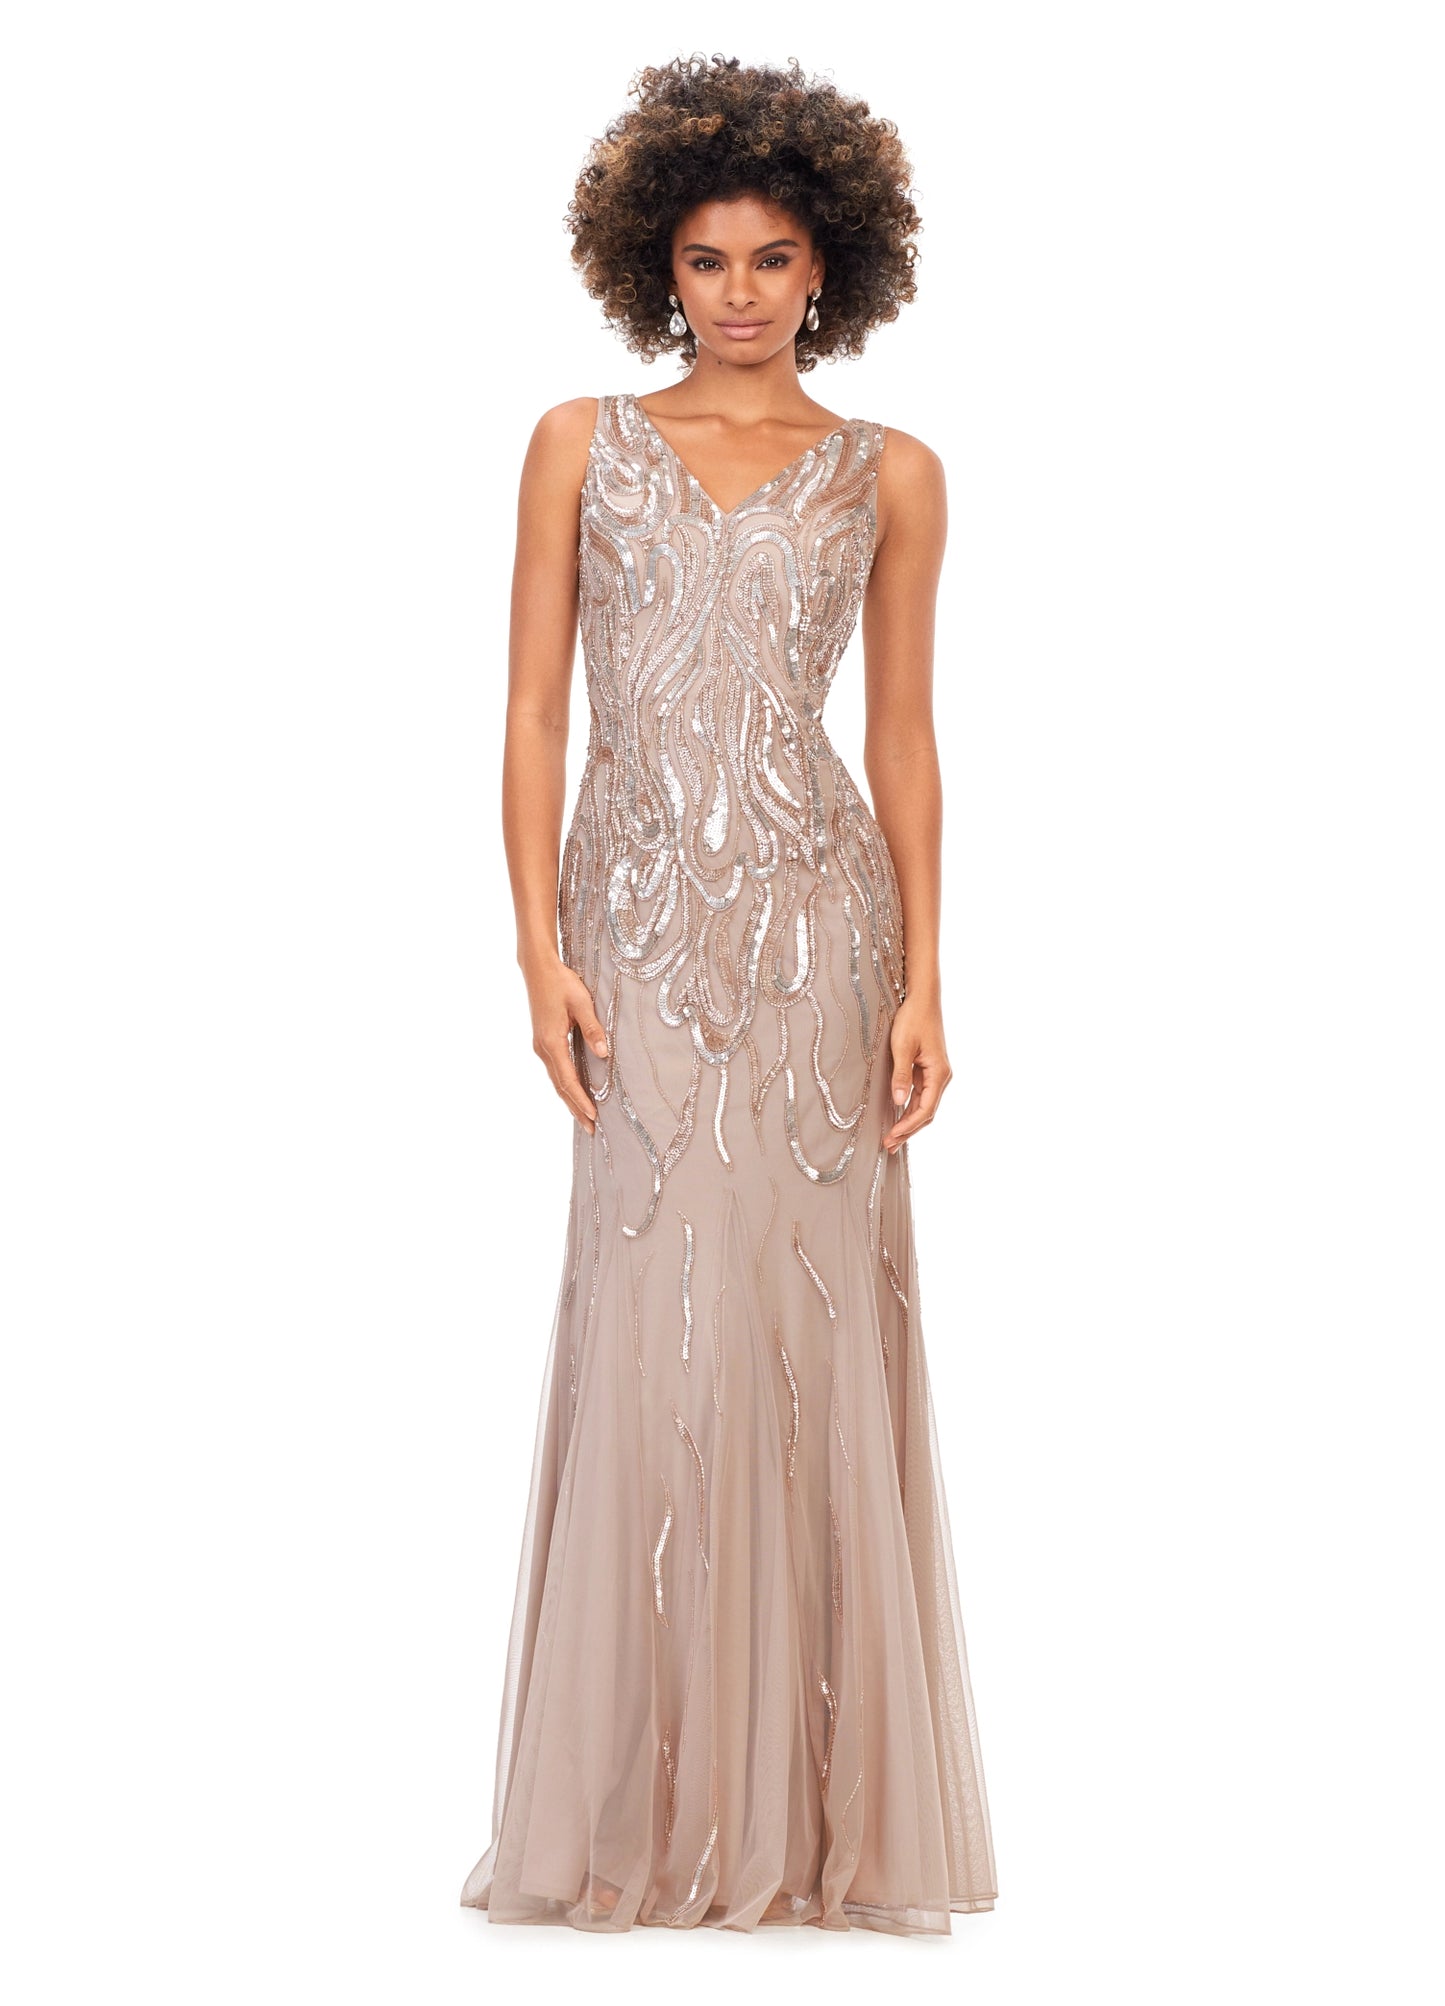 Ashley Lauren 11204 V-Neck Sequin V-Back Hand Beaded Sheer Long Evening Dress. This classic fitted gown features a v-neckline, v-back and a flattering bead pattern.